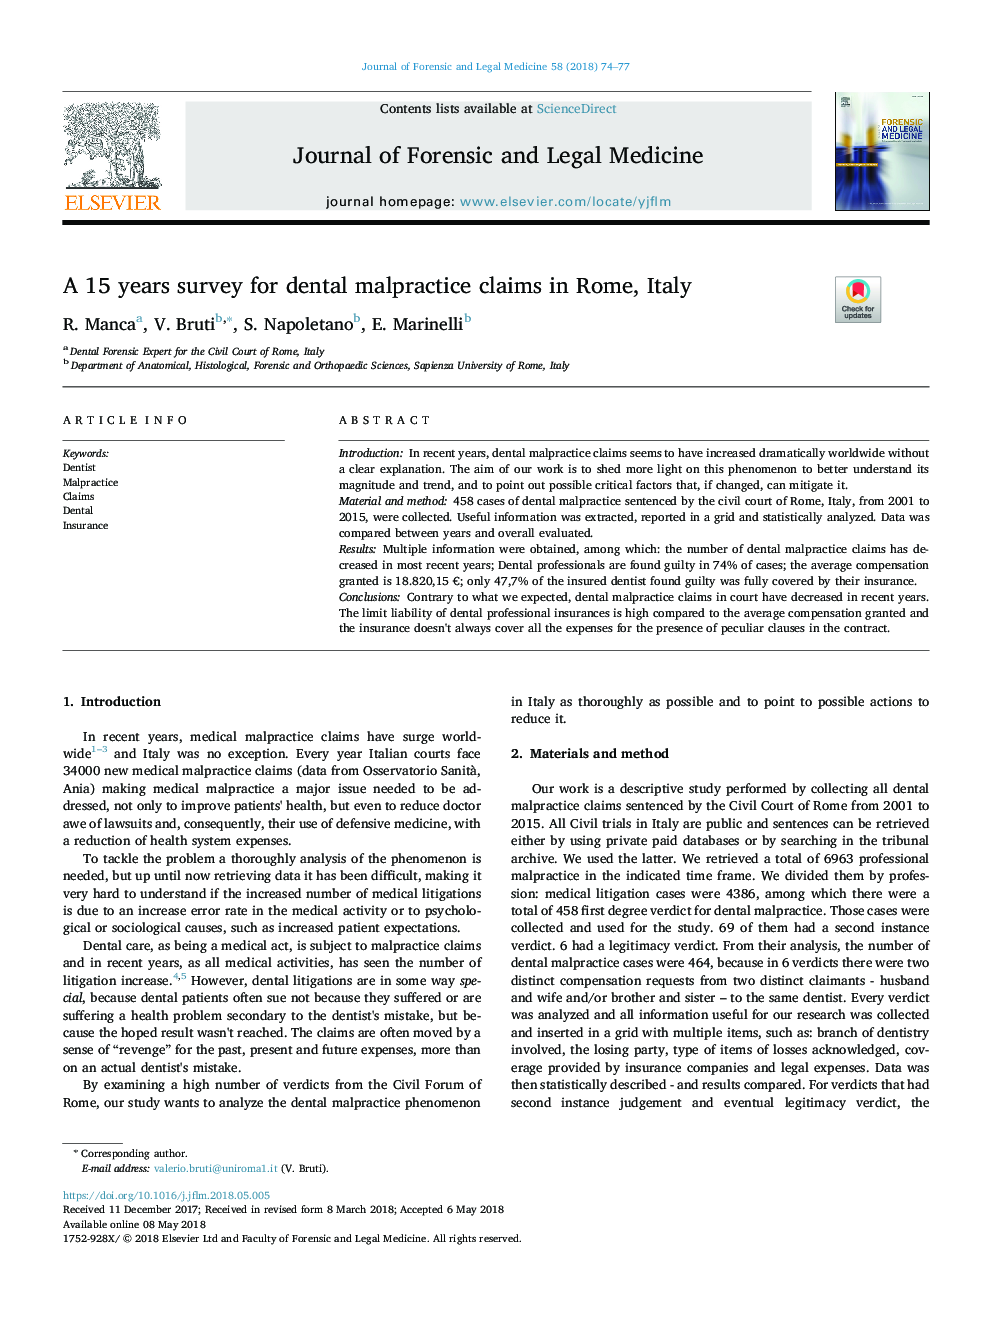 A 15 years survey for dental malpractice claims in Rome, Italy